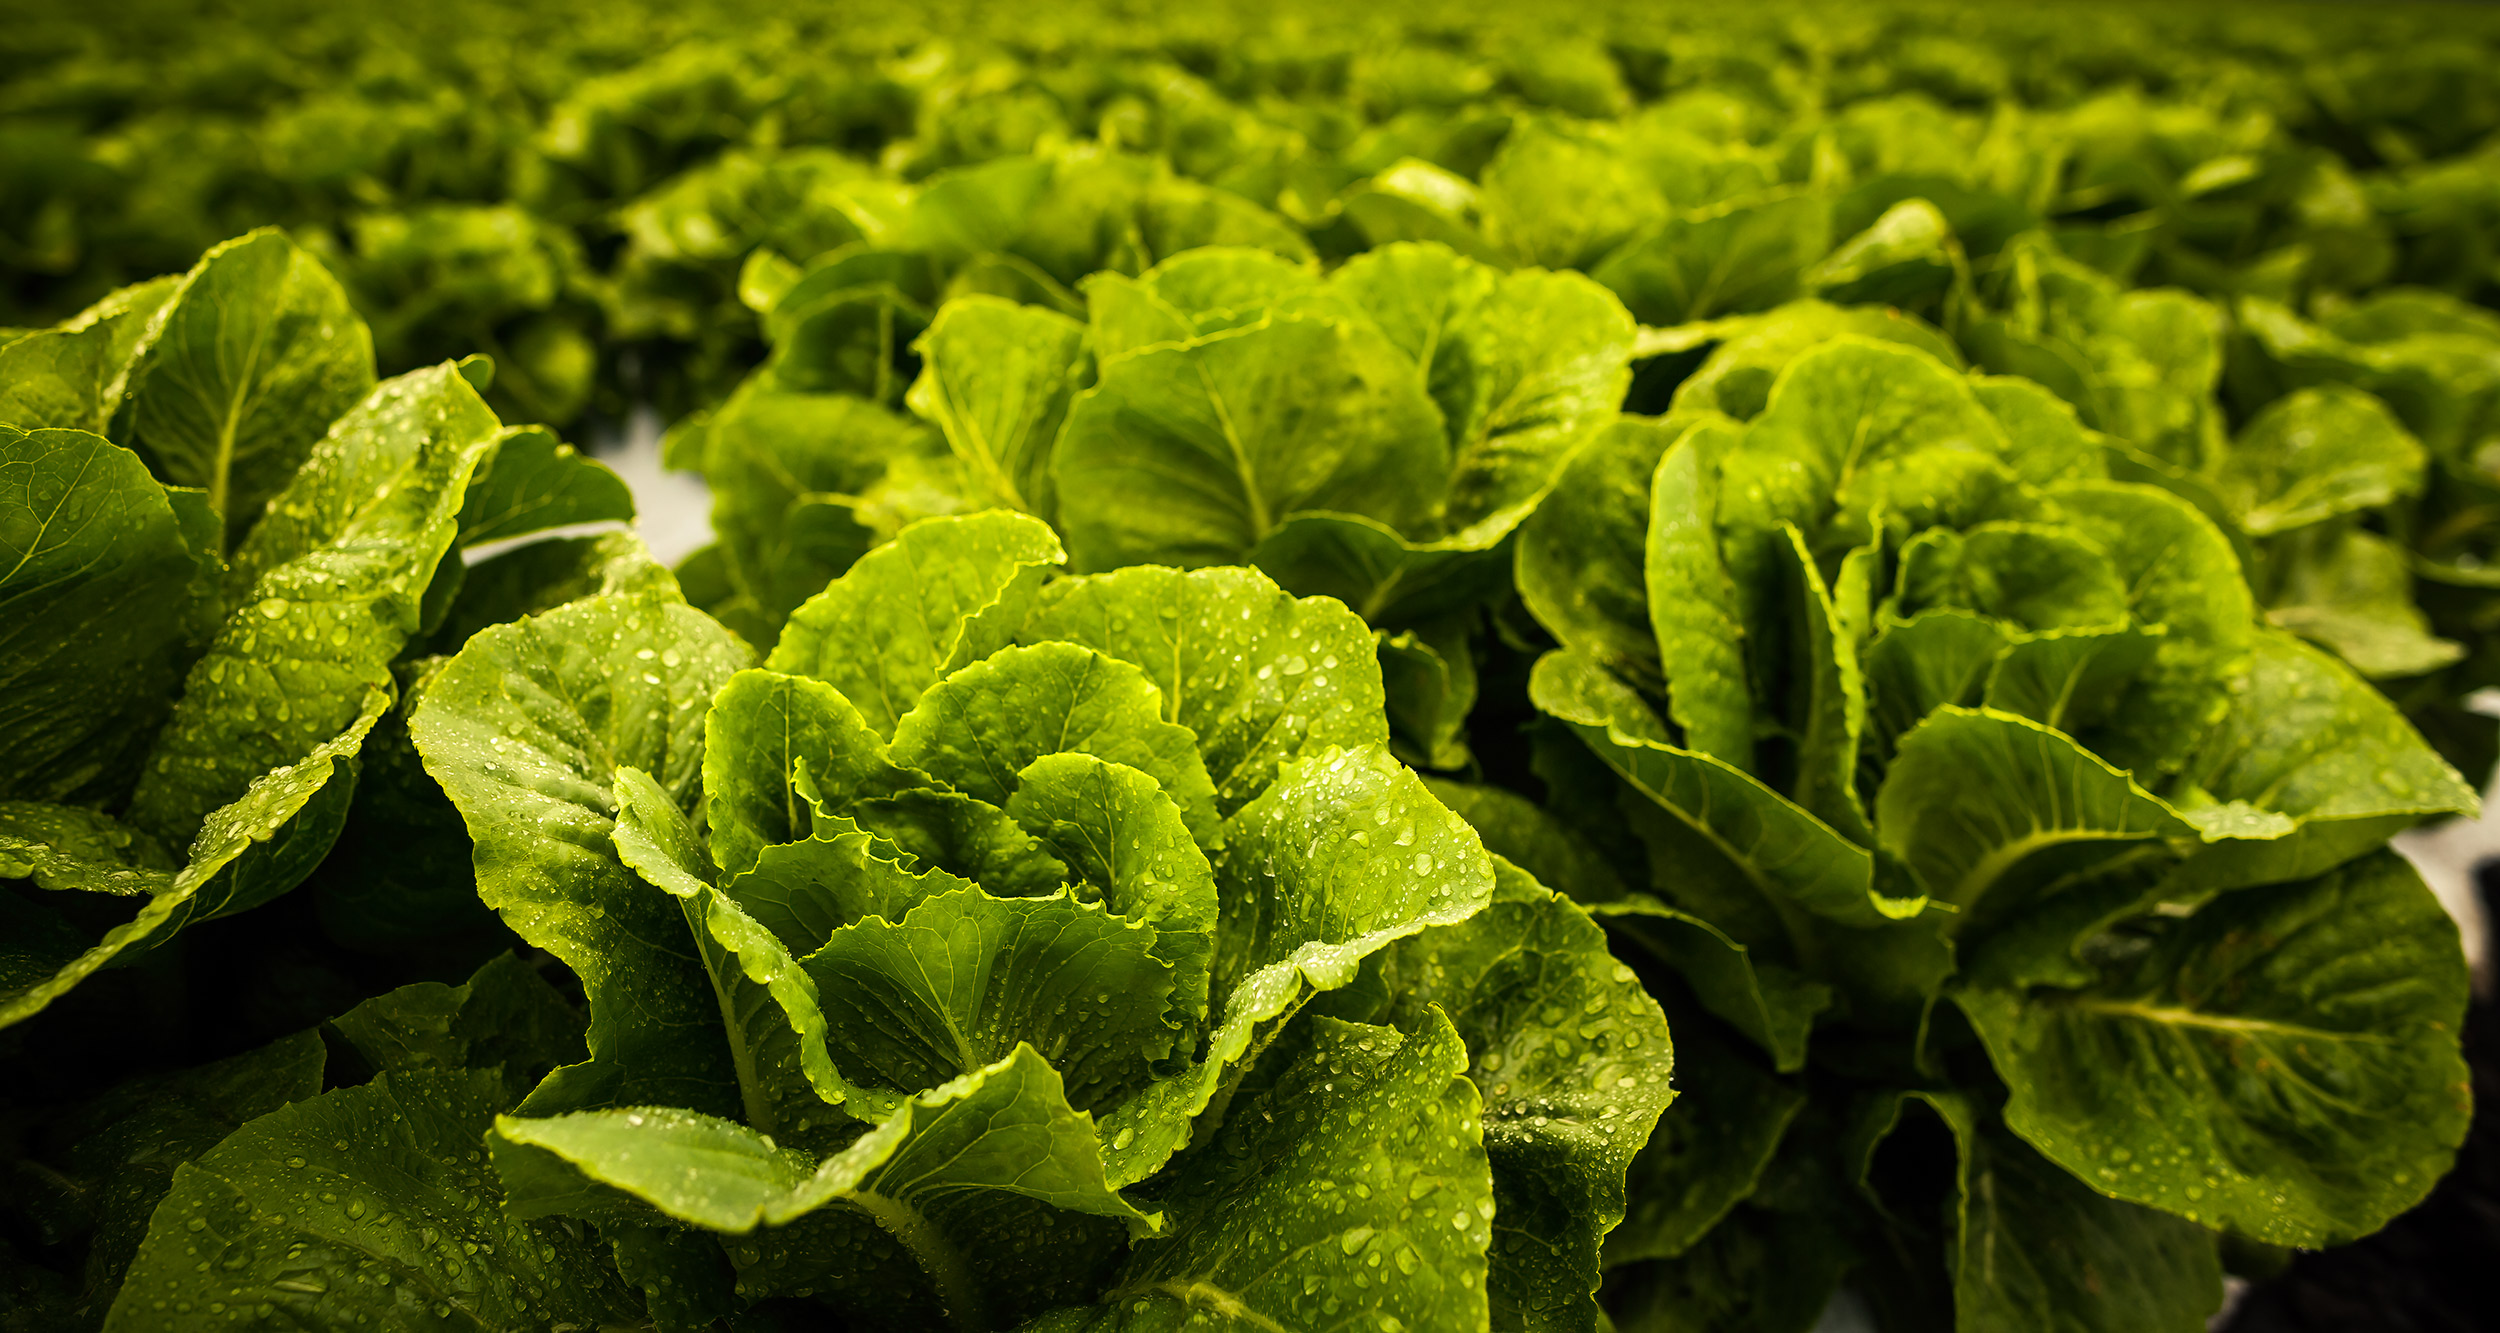 Romaine lettuce ready to harvest in the field. agriculture photography.